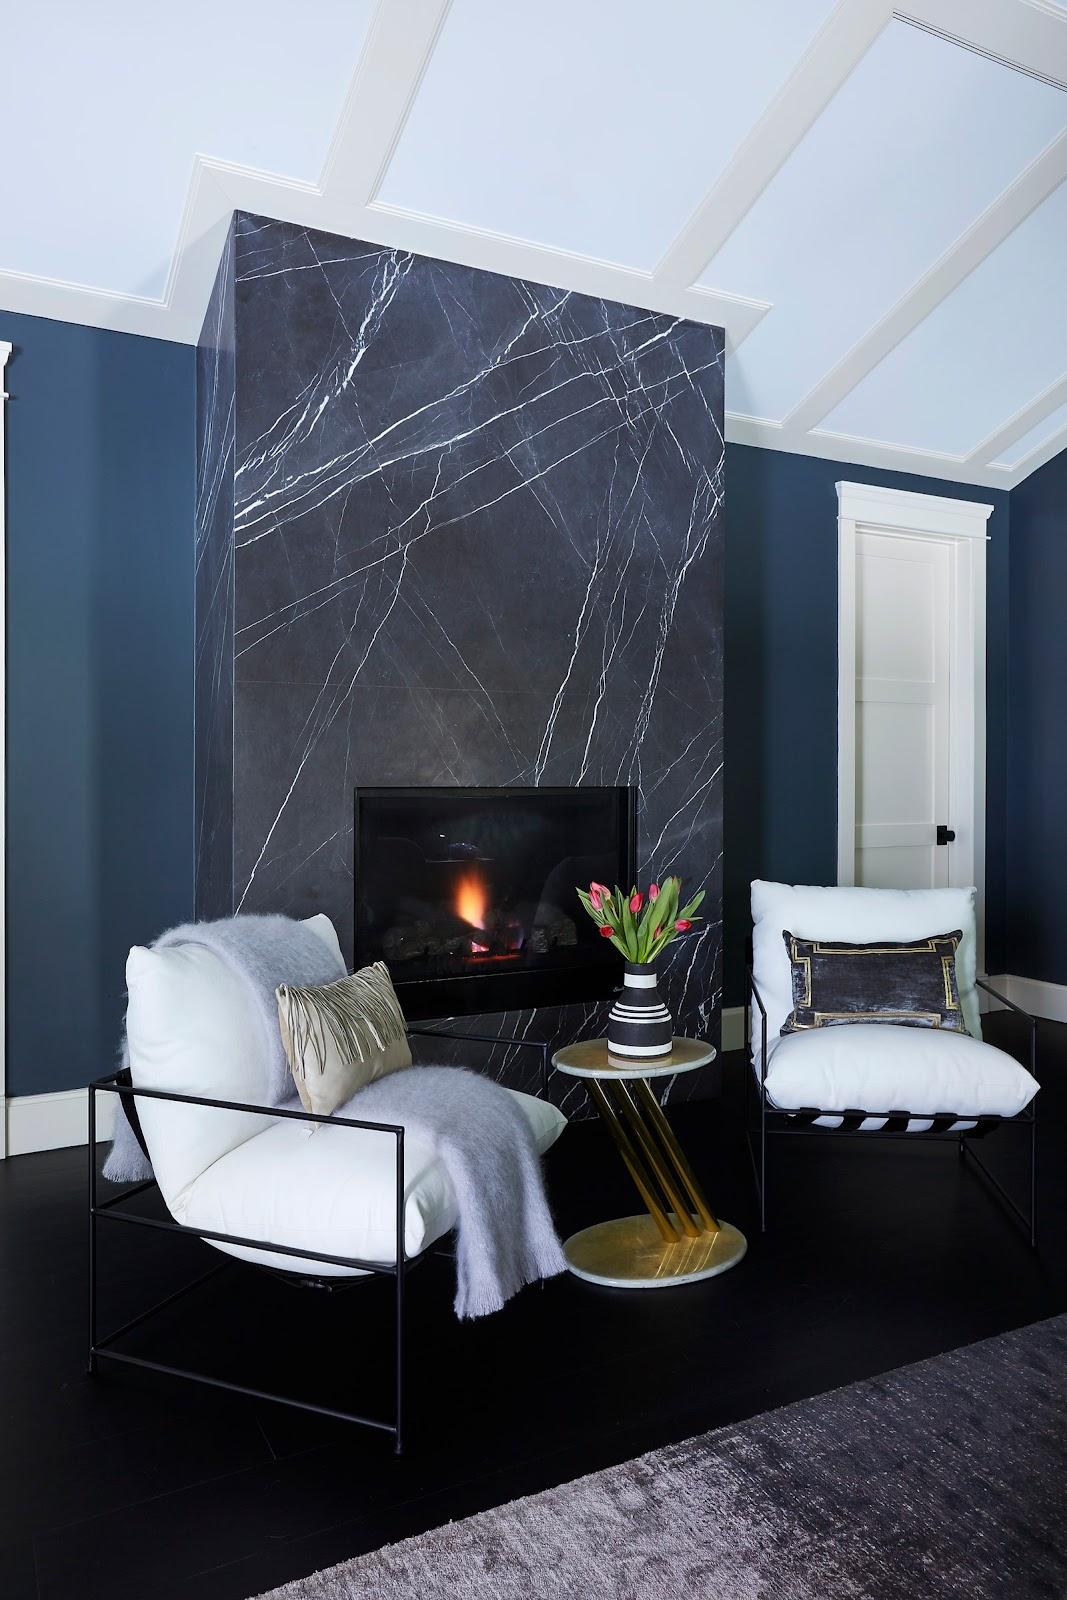 Join the dark side as seen in this Black Lacquer Design project.